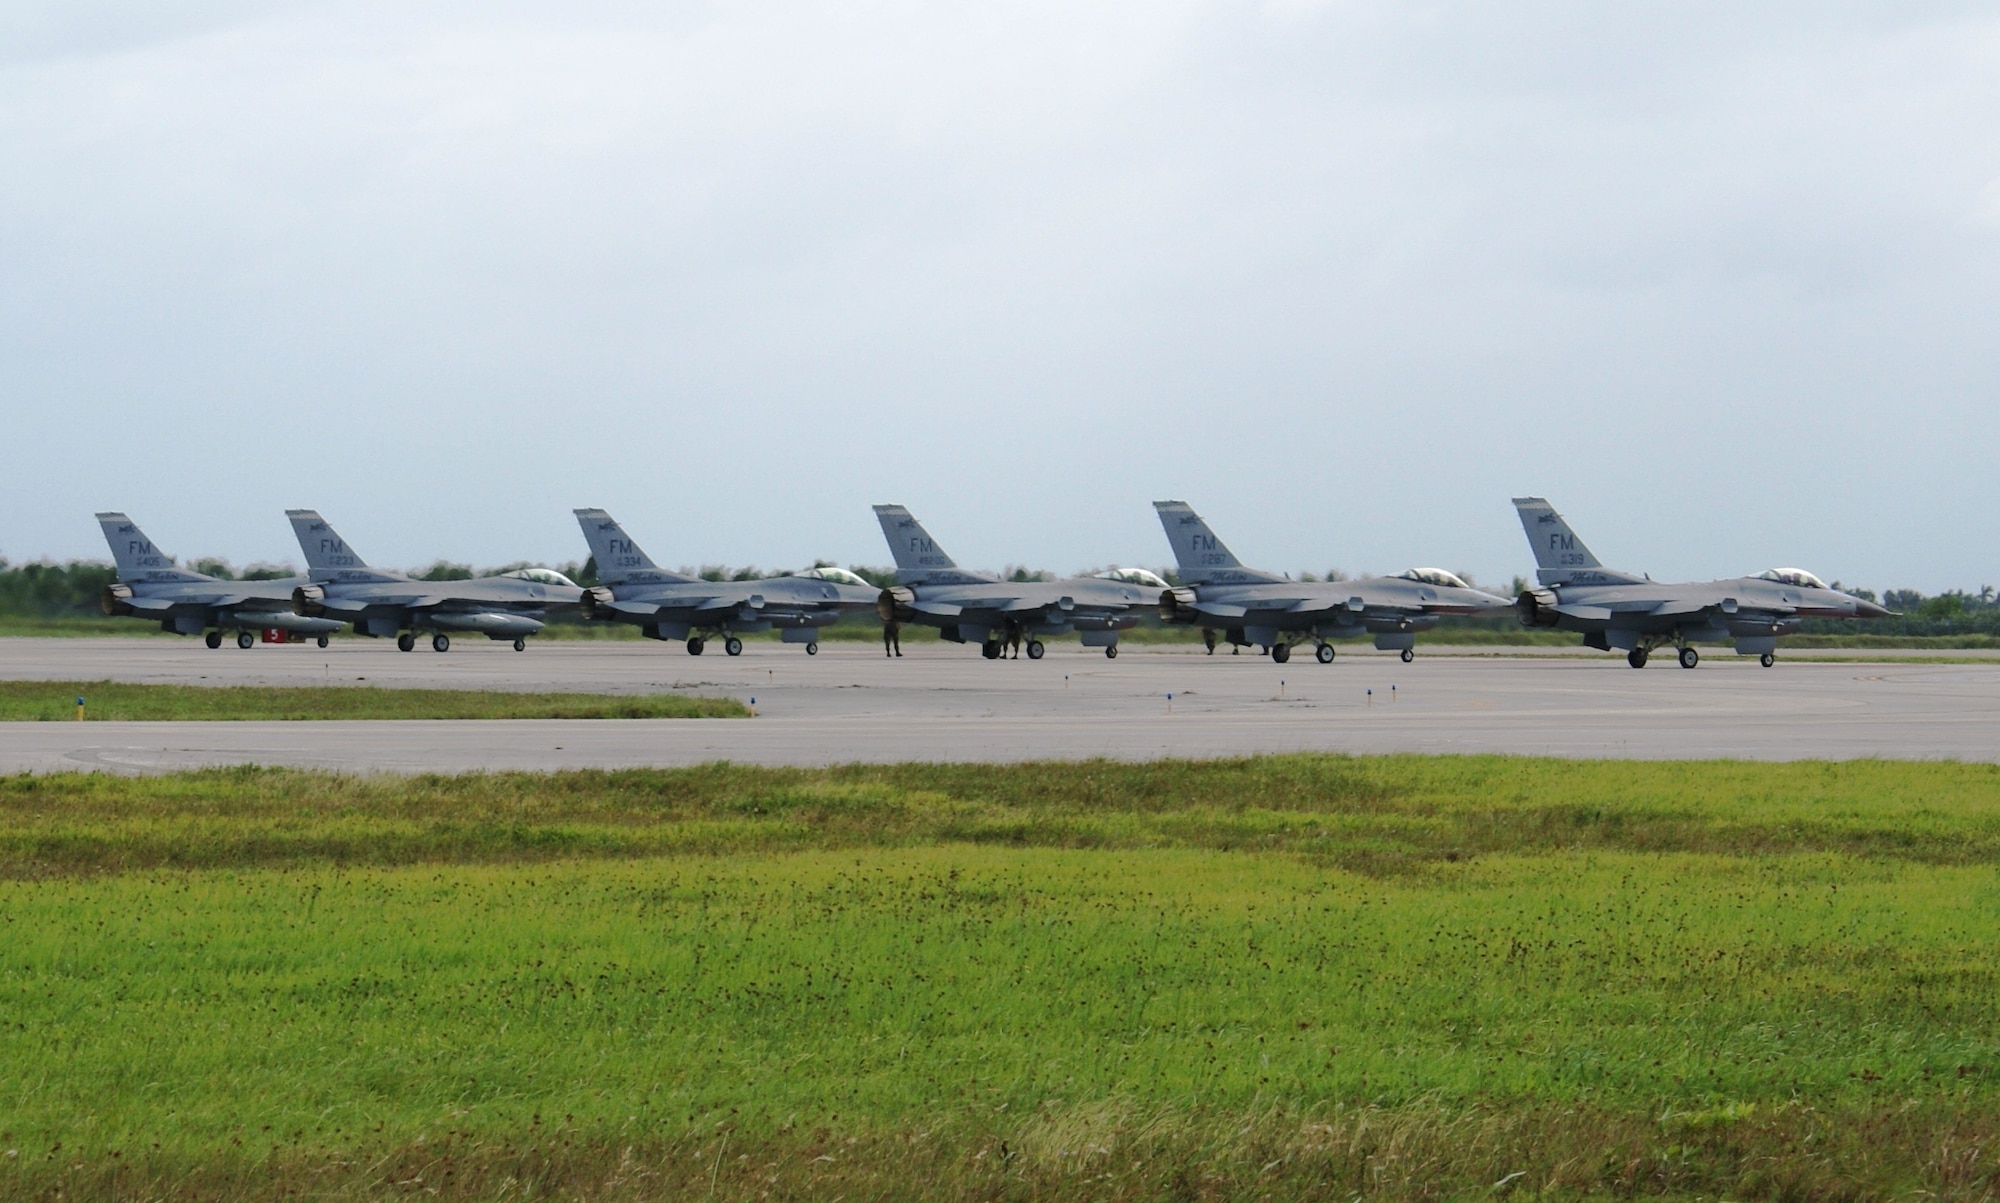 Six F-16 aircraft from the 482nd Fighter Wing, Homestead Air Reserve Base, Fla., await departure Oct. 30, 2007.  A total of 24 F-16 fighter jets left Homestead ARB for Dobbins Air Reserve Base, Ga., as part of preparations for Tropical Storm Noel.  The early evacuation allows pilots and maintenance personnel to return home to south Florida in time to care for their families before a storm. The movement of jets is a precaution to protect this valuable national asset. (U.S. Air Force photo/Tim Norton)
